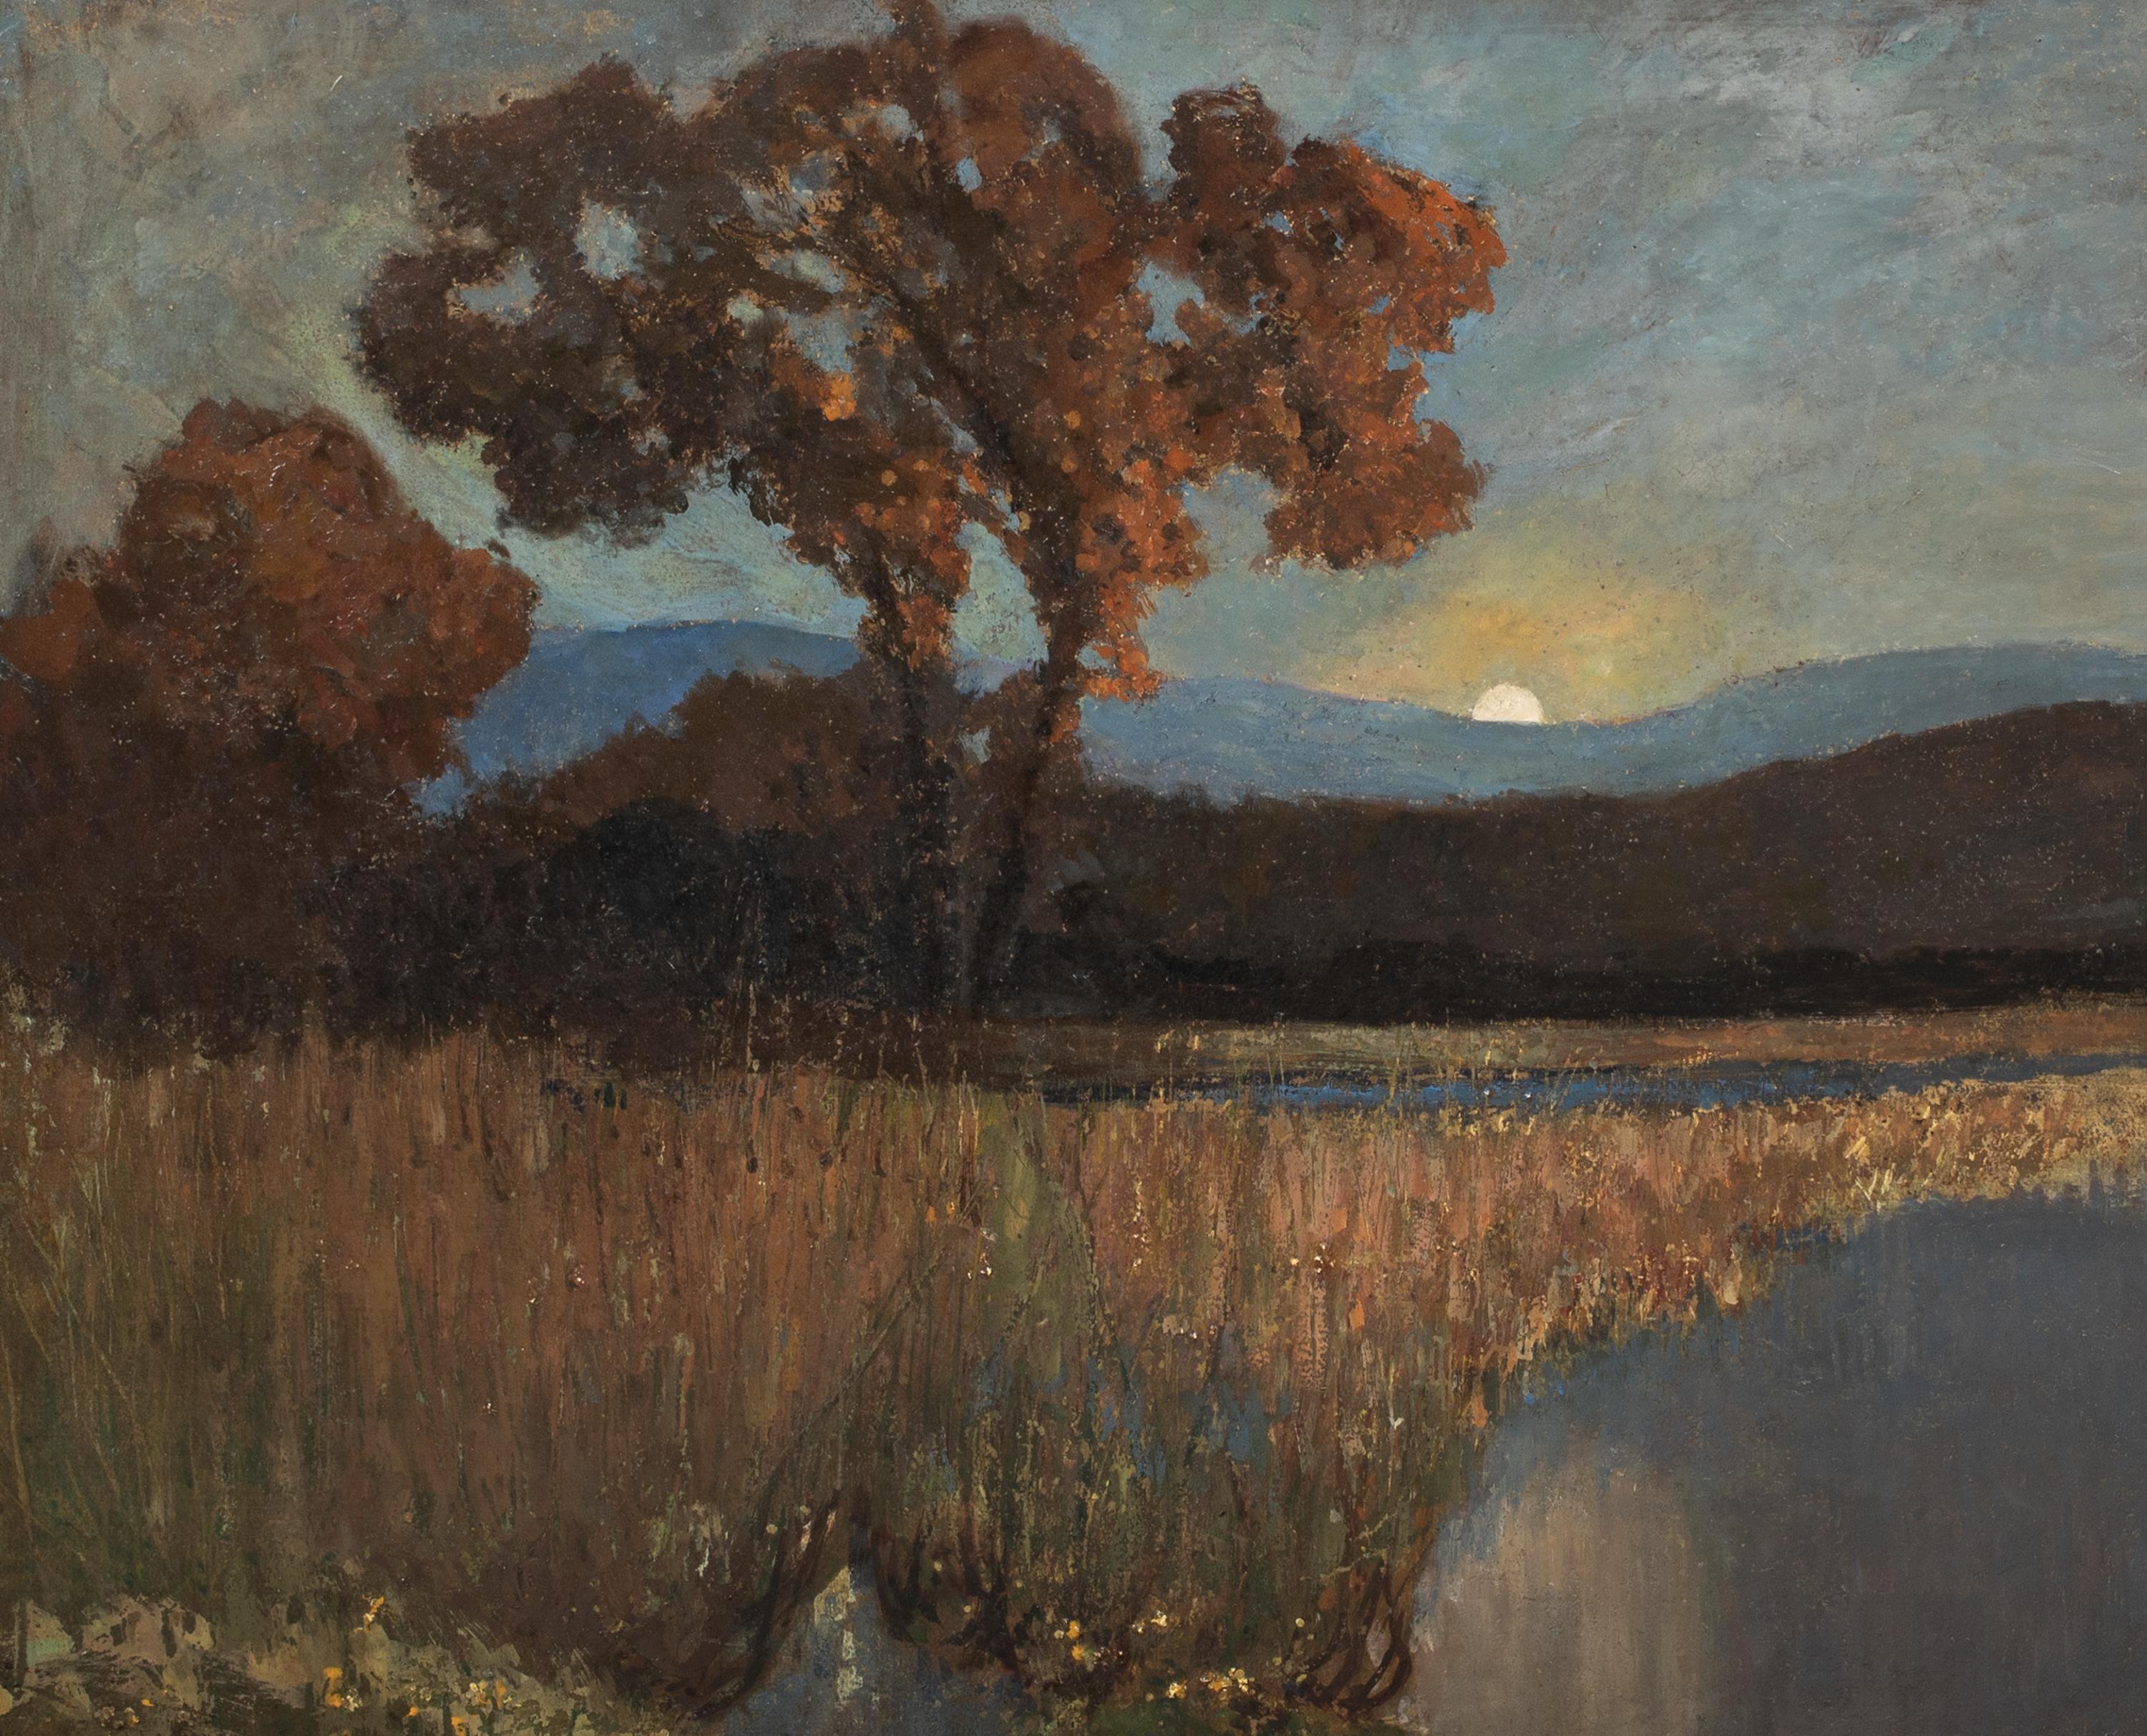 Essex: October Twilight, 19th Century

by Sir George CLAUSEN (1852-1944) to $2,200,000

Large 19th century twilight landscape over Essex, oil on board by Sir George Clausen. Extensive view overlooking the hills of Essex at the close of the day as